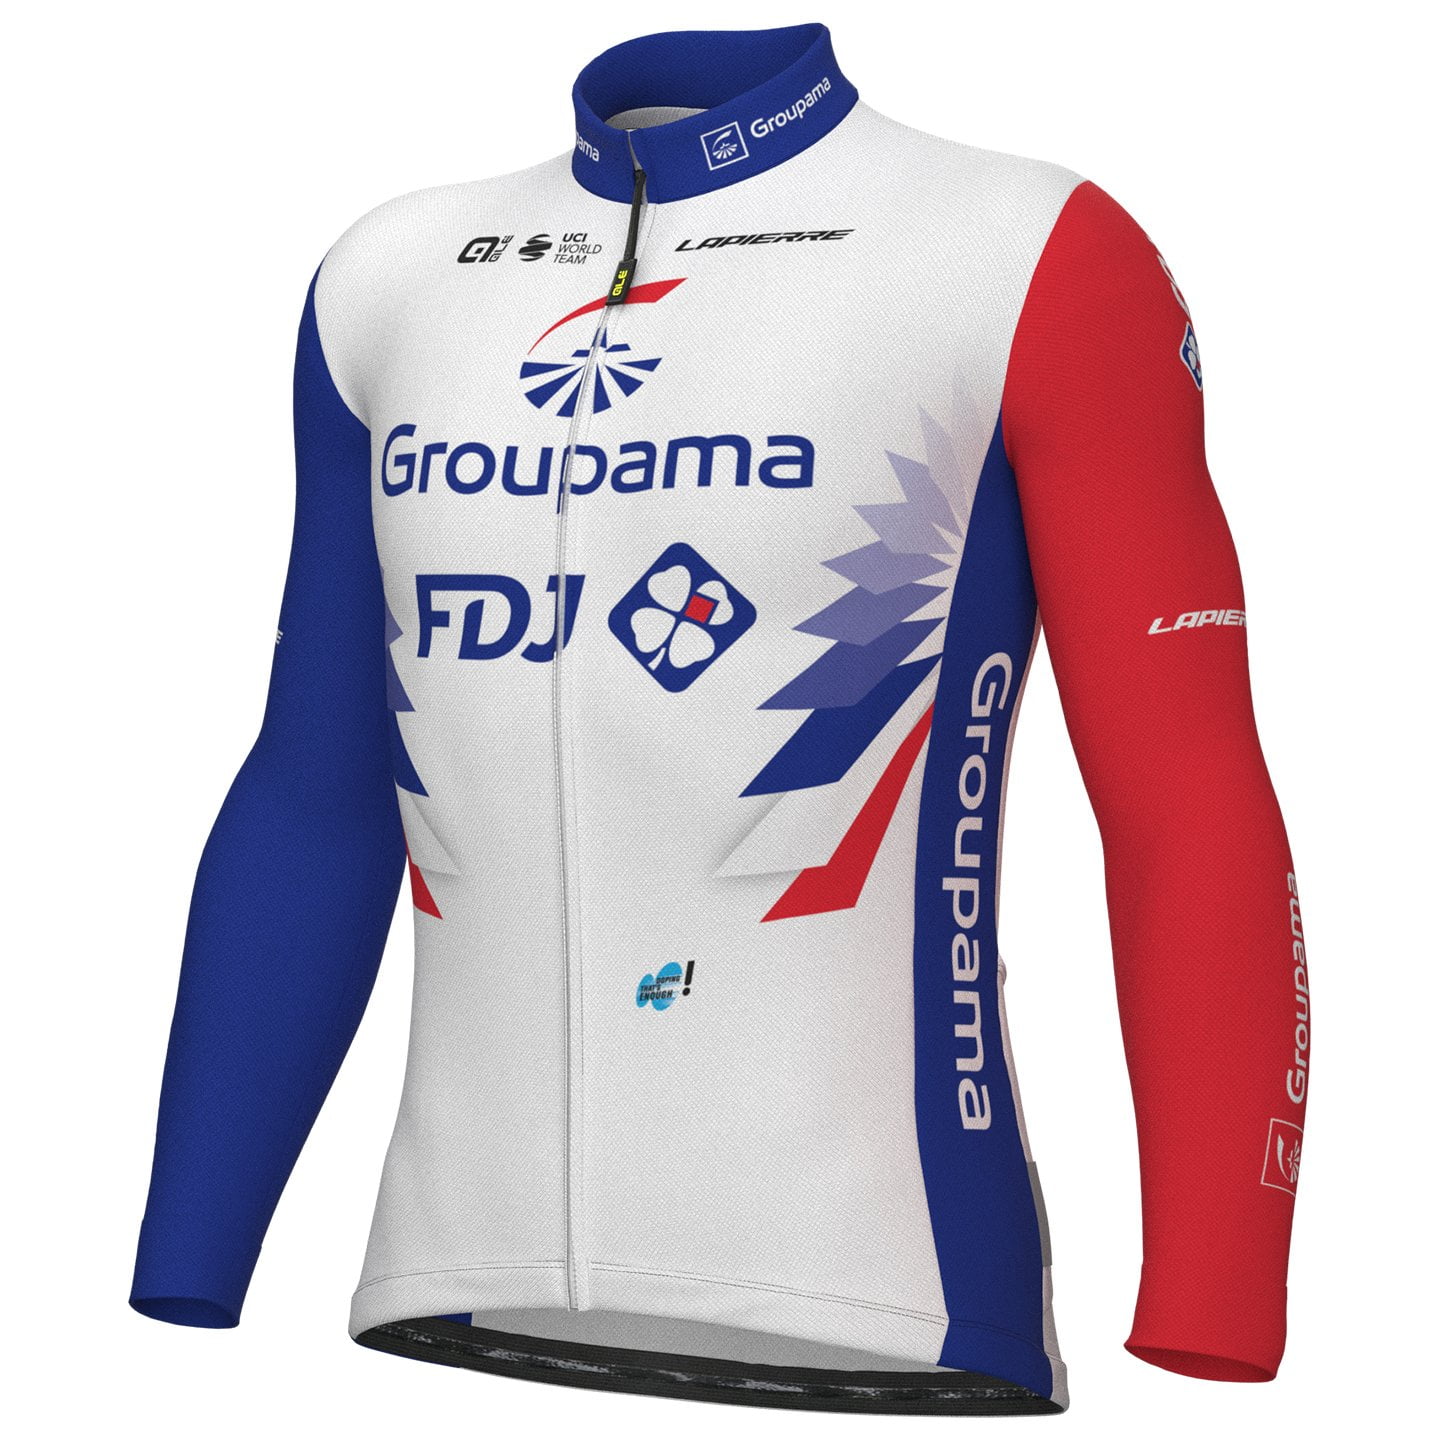 GROUPAMA - FDJ 2022 Long Sleeve Jersey, for men, size S, Cycling jersey, Cycling clothing